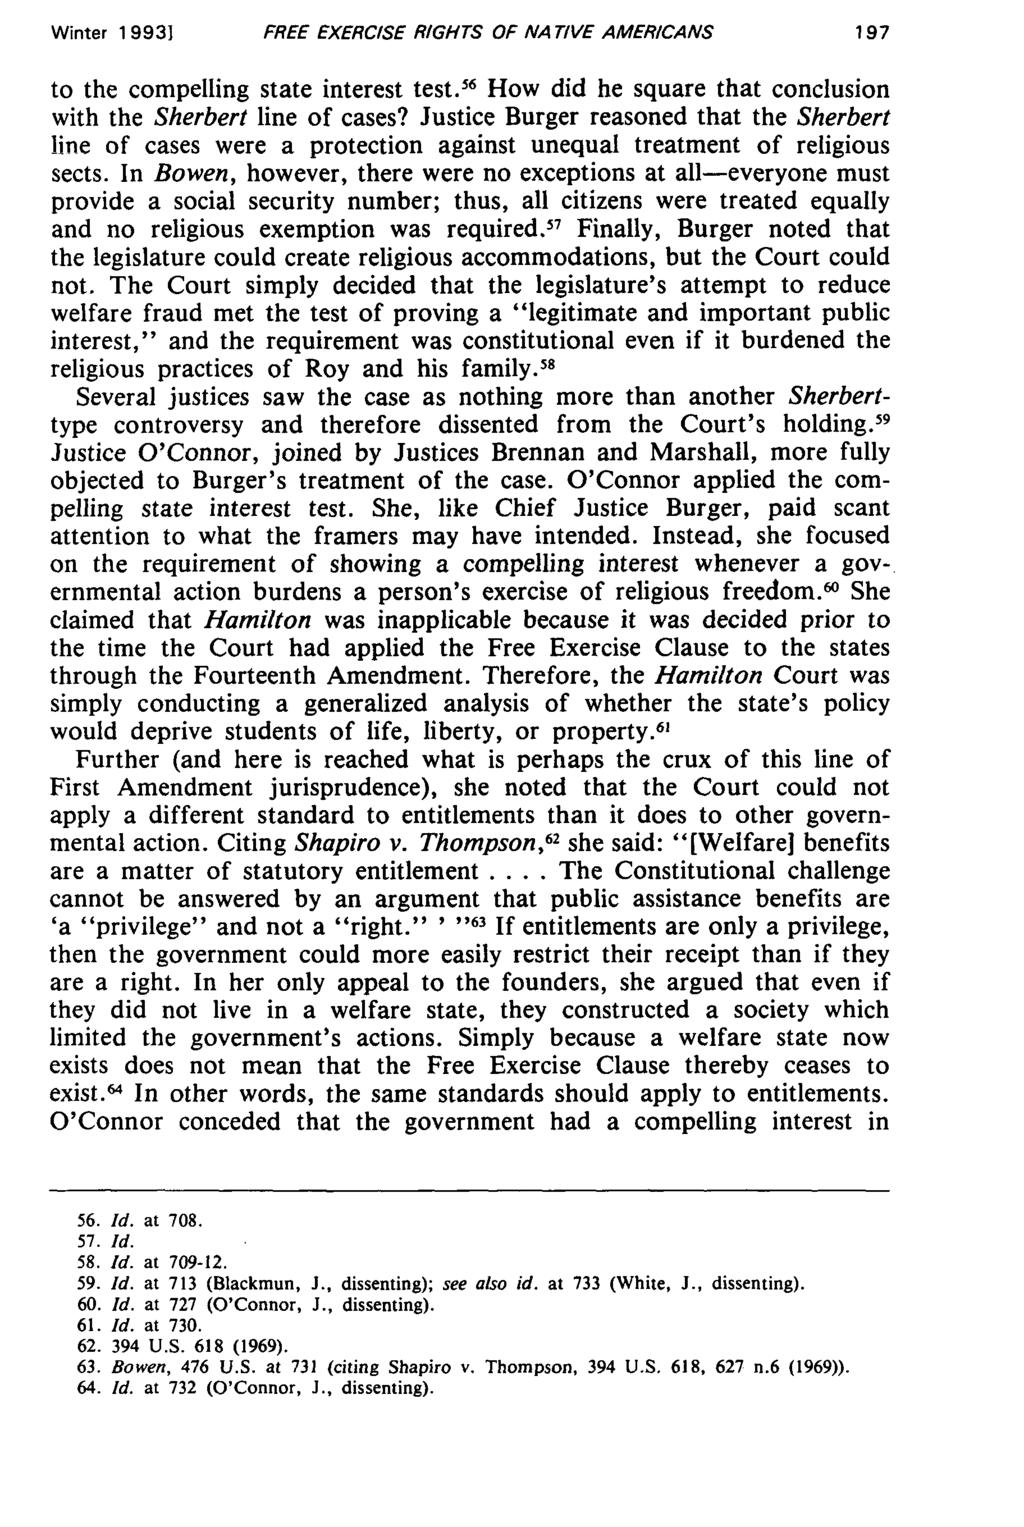 Winter 19931 FREE EXERCISE RIGHTS OF NATIVE AMERICANS to the compelling state interest test.1 6 How did he square that conclusion with the Sherbert line of cases?